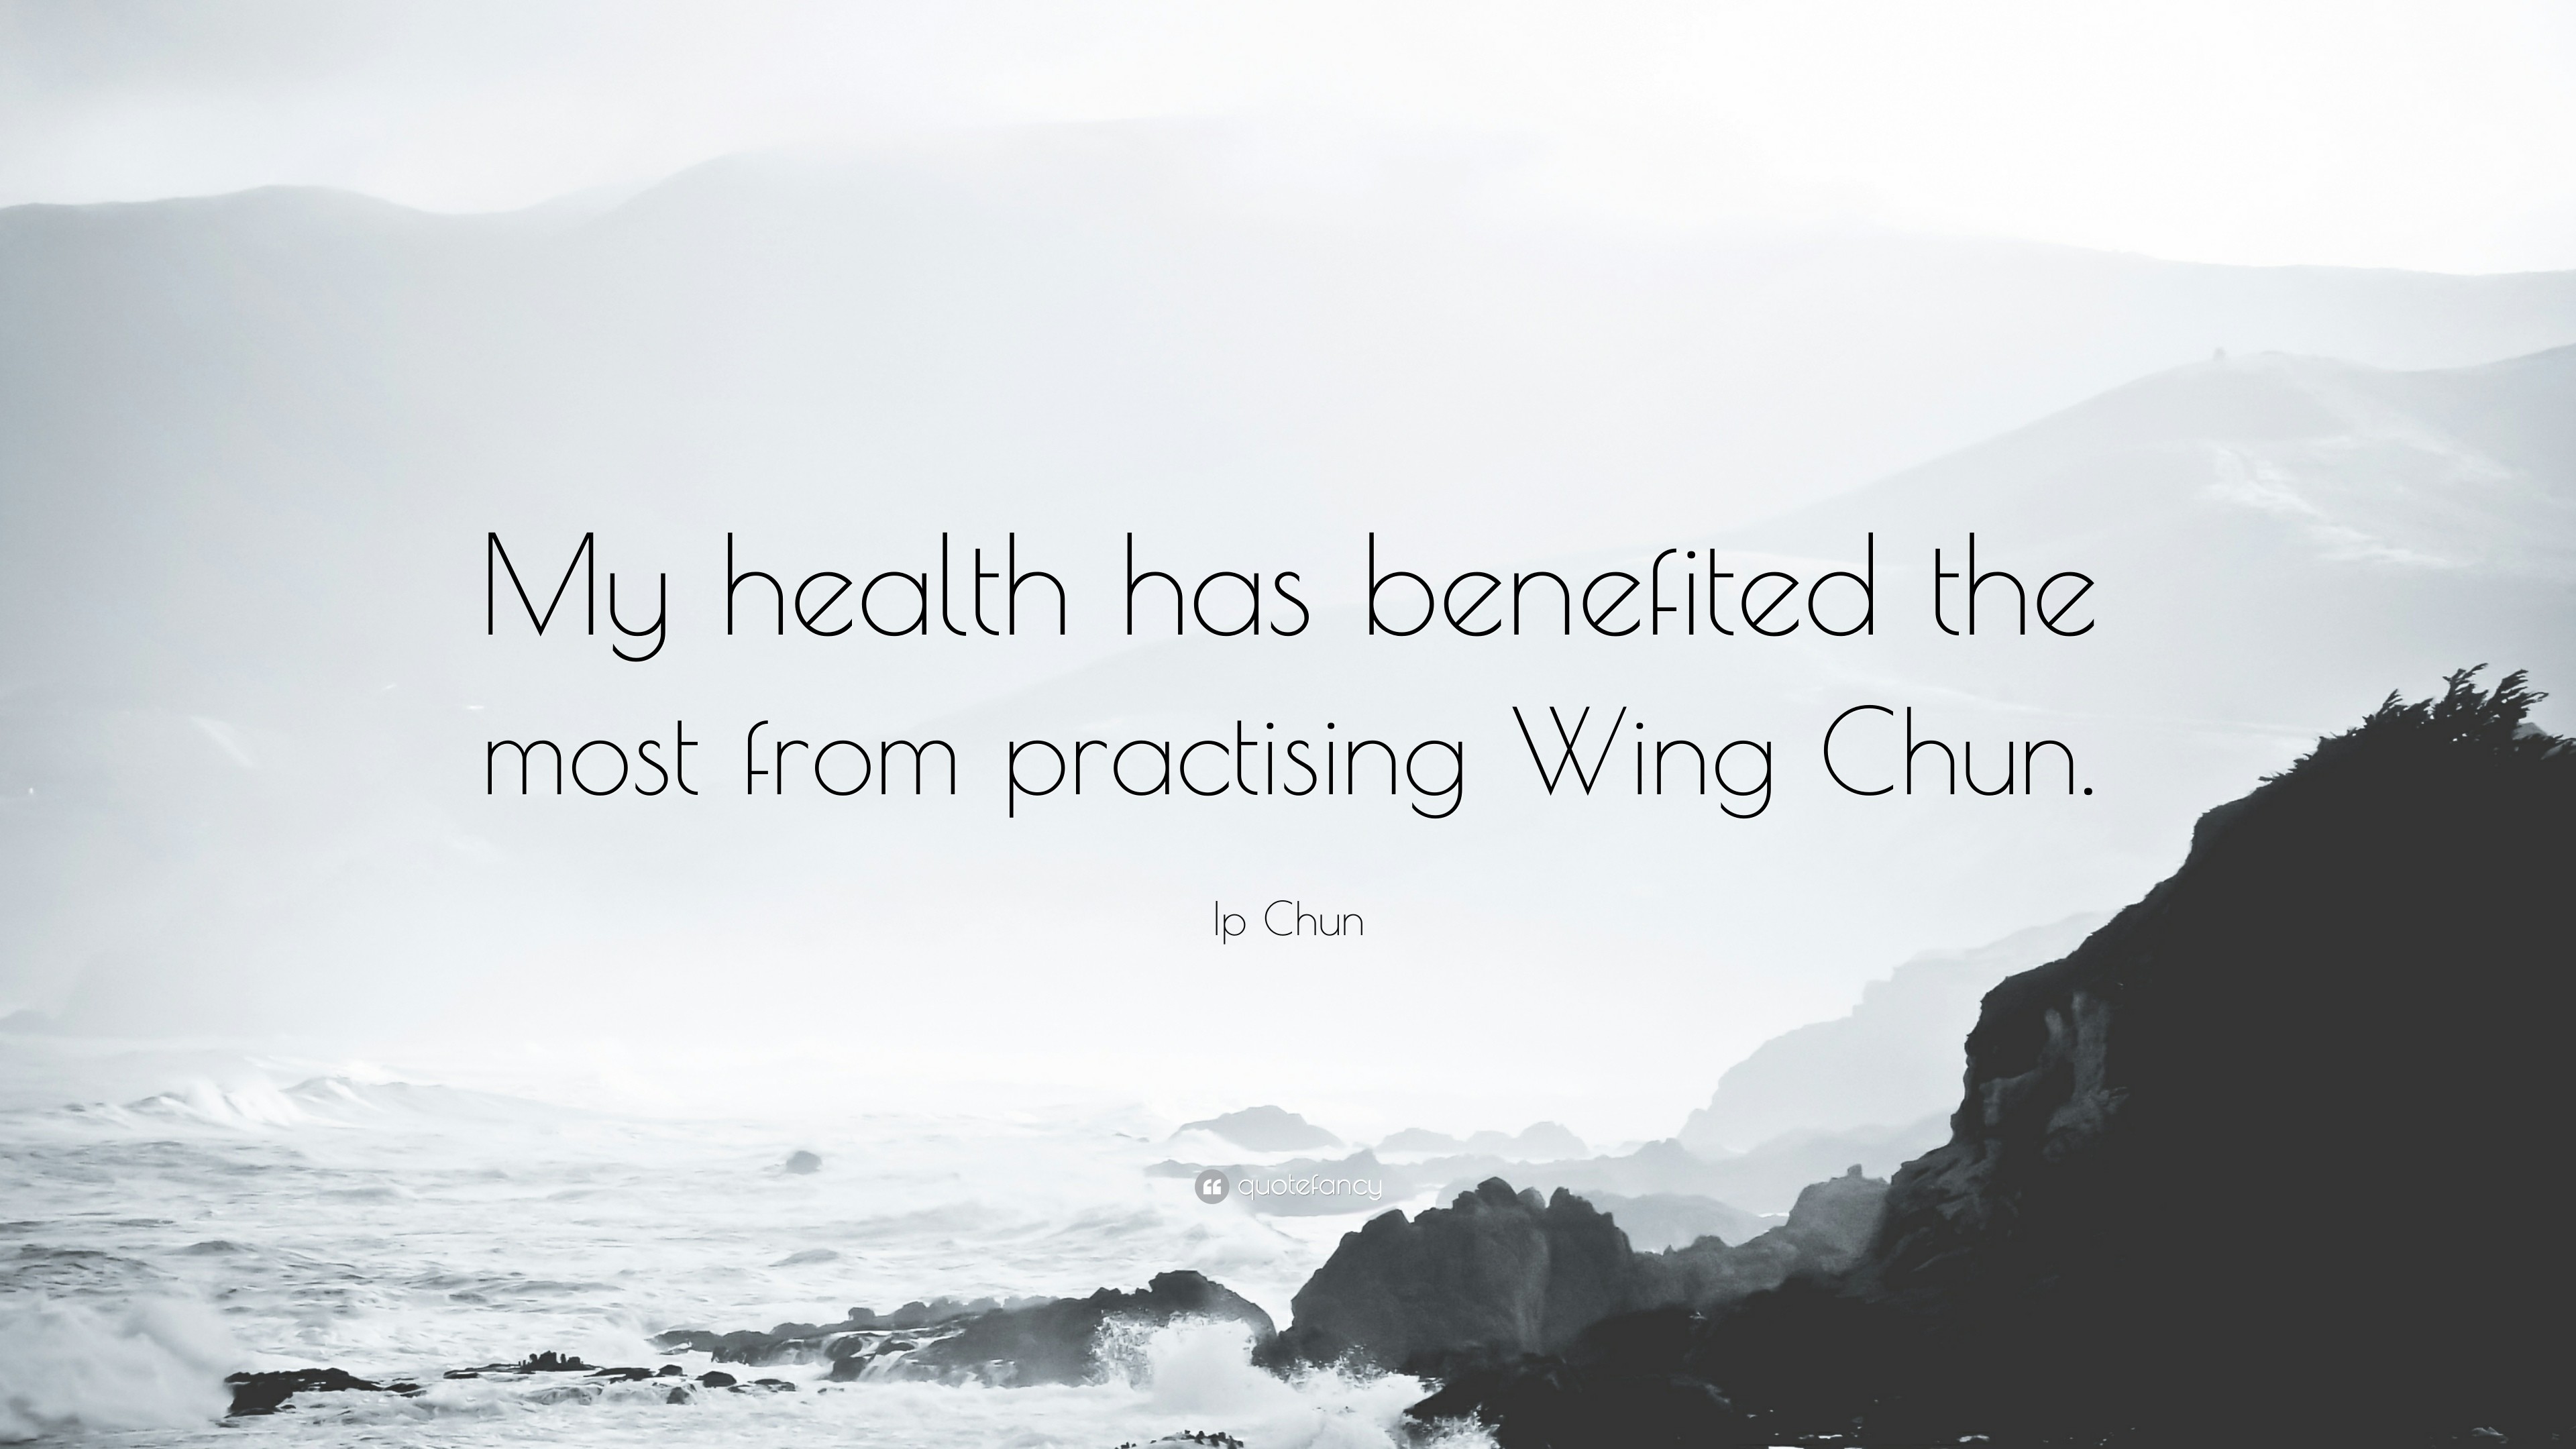 3840x2160 Ip Chun Quote: “My health has benefited the most from practising Wing Chun.